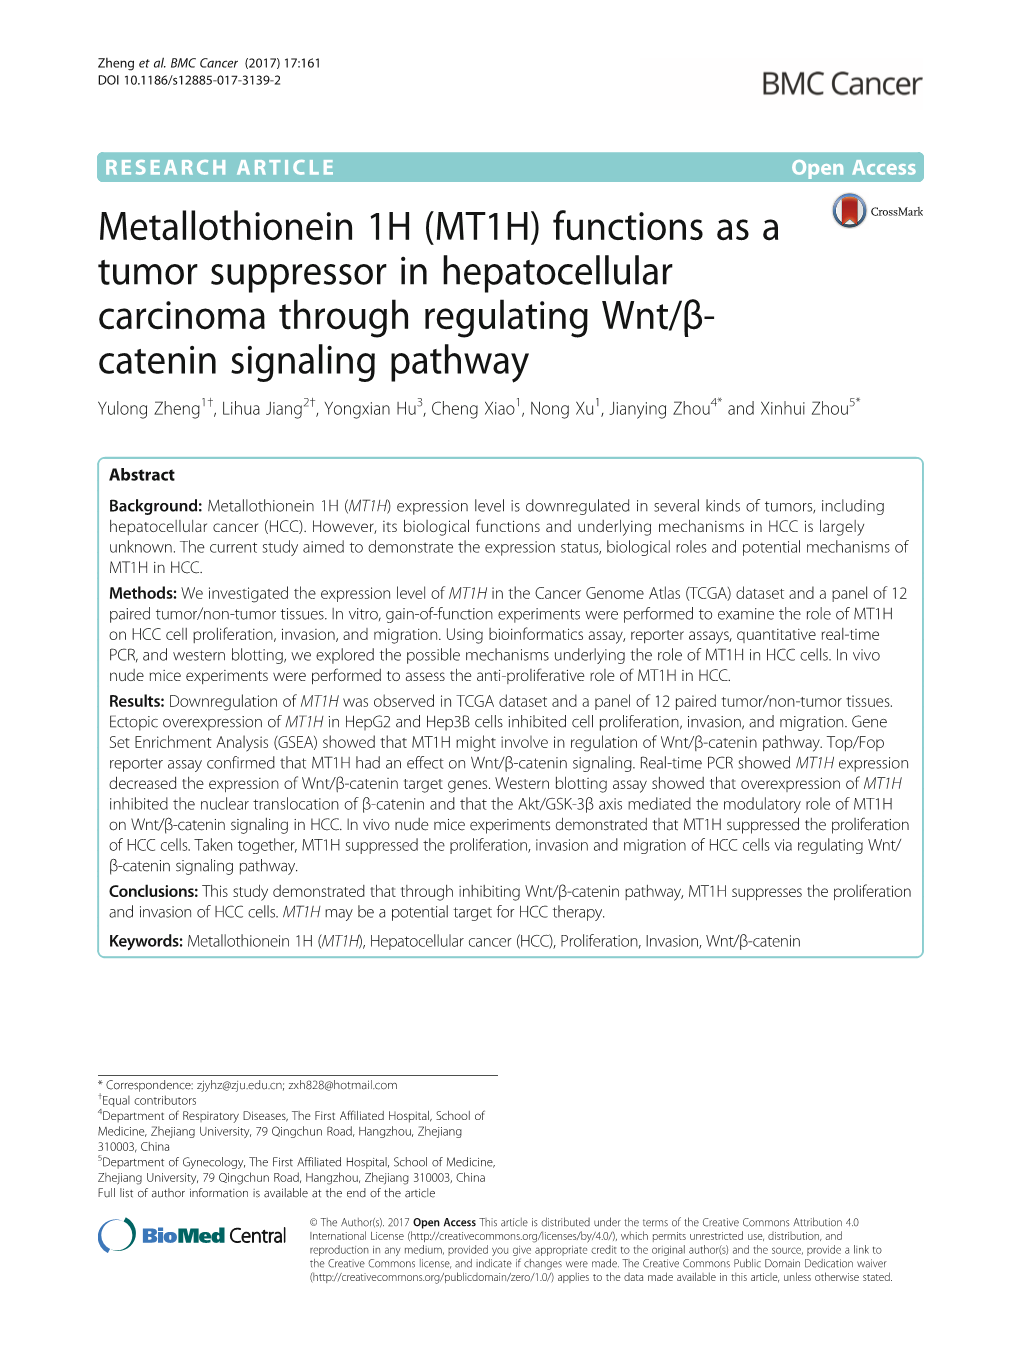 Metallothionein 1H (MT1H) Functions As a Tumor Suppressor In